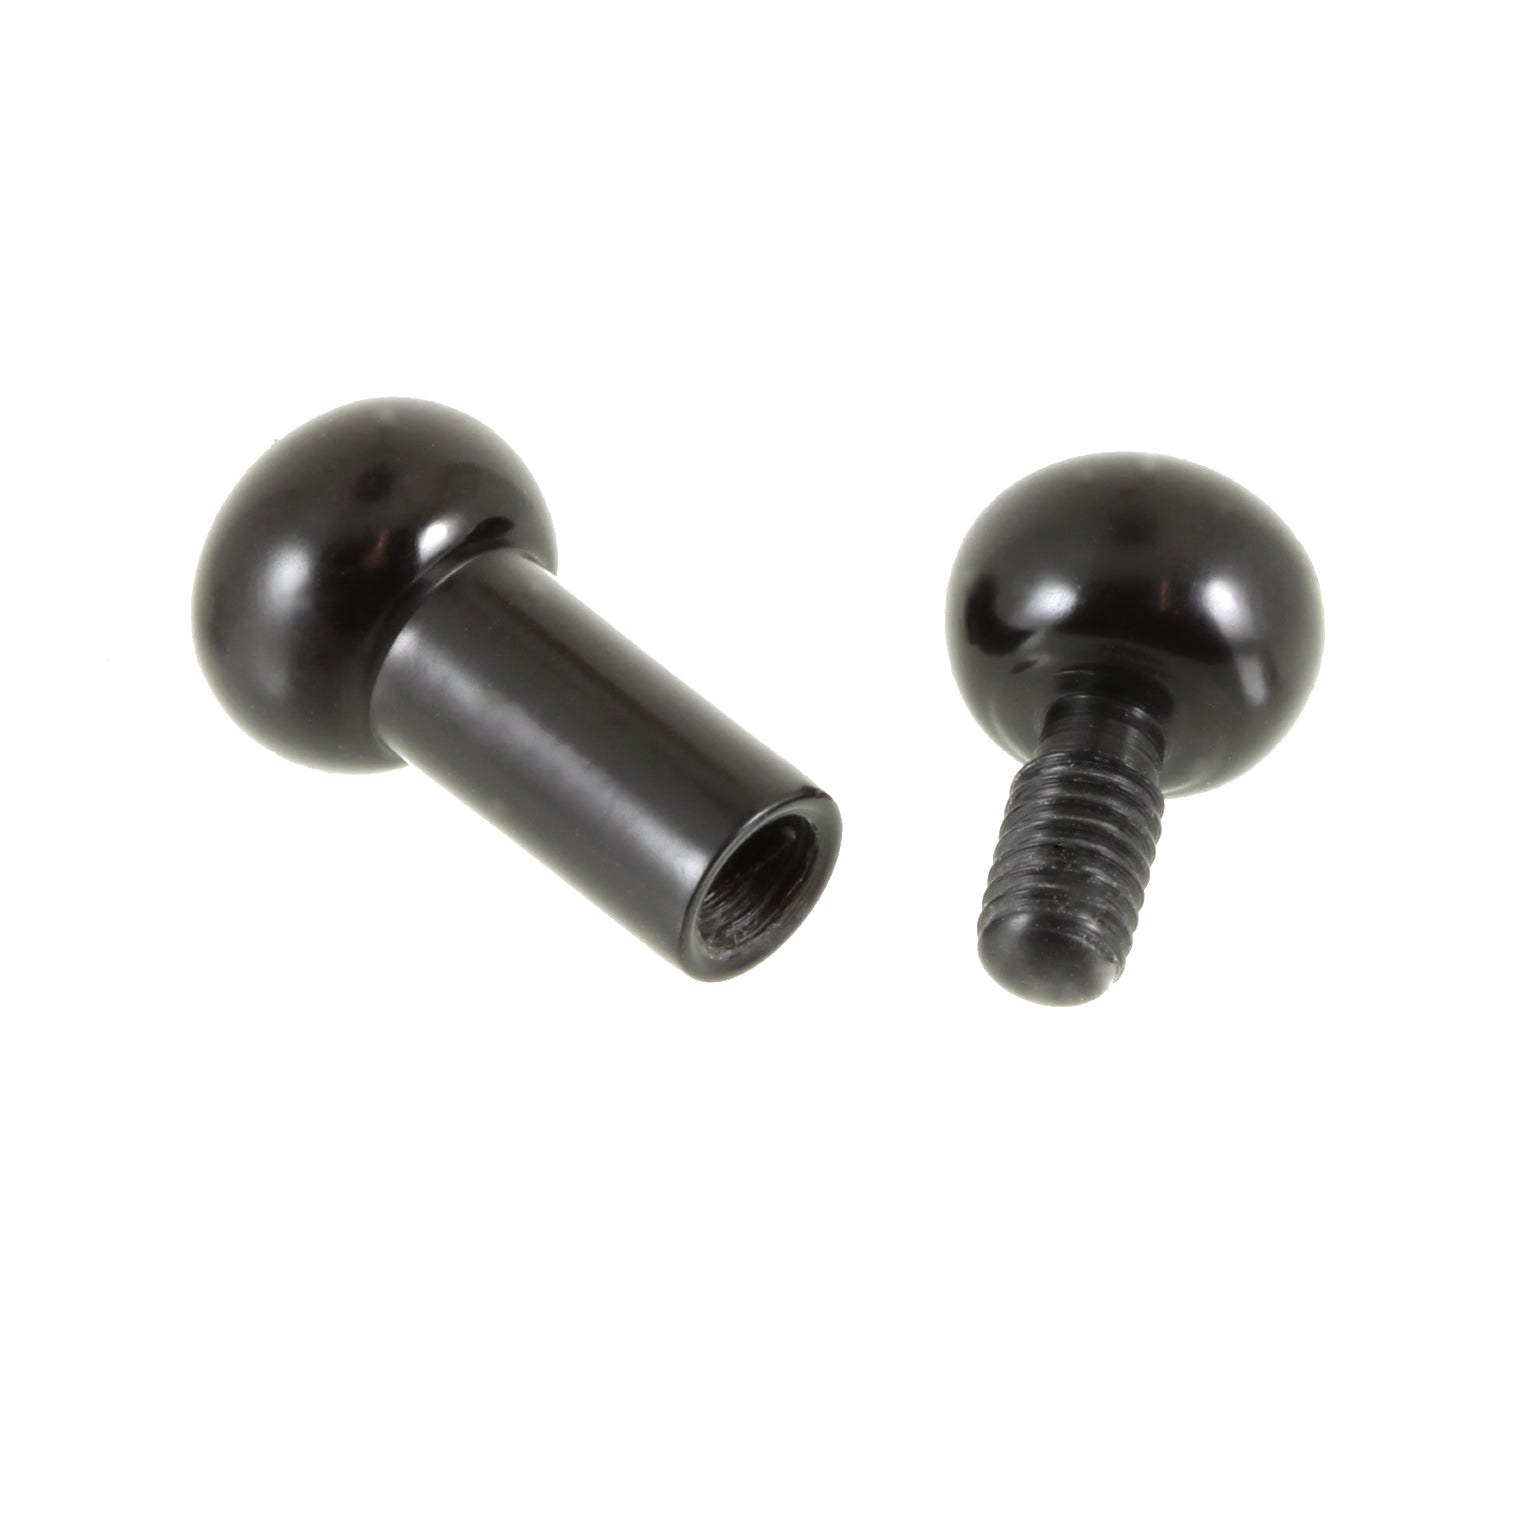 Delrin Threaded Barbells - Bead Ends